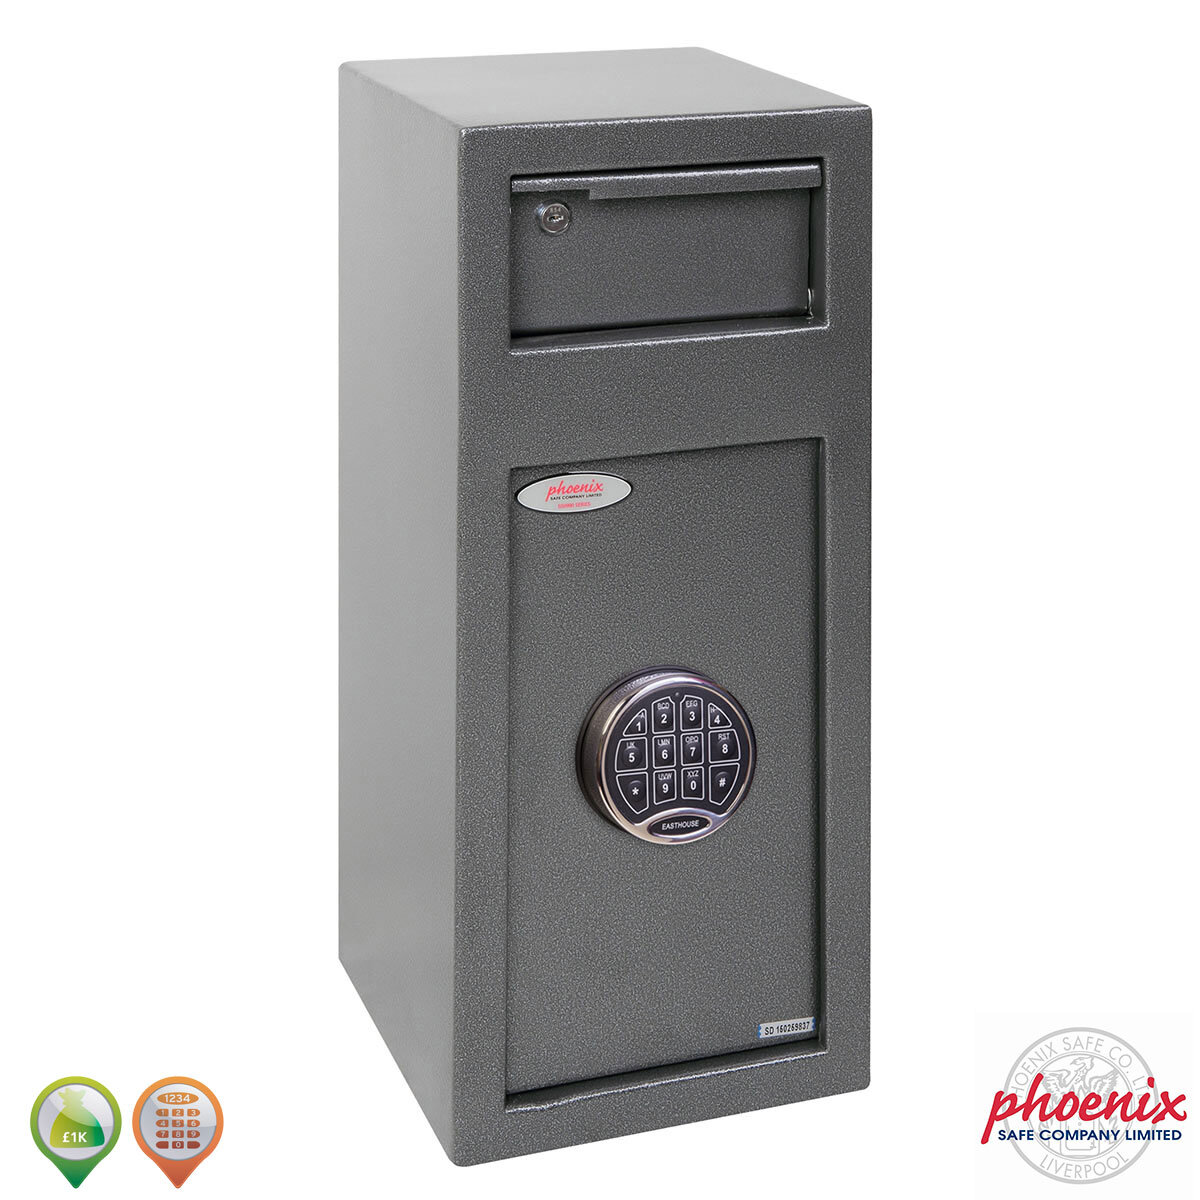 Phoenix 19 Litre SS0992ED Cashier Day Deposit Security Safe with Electronic Lock